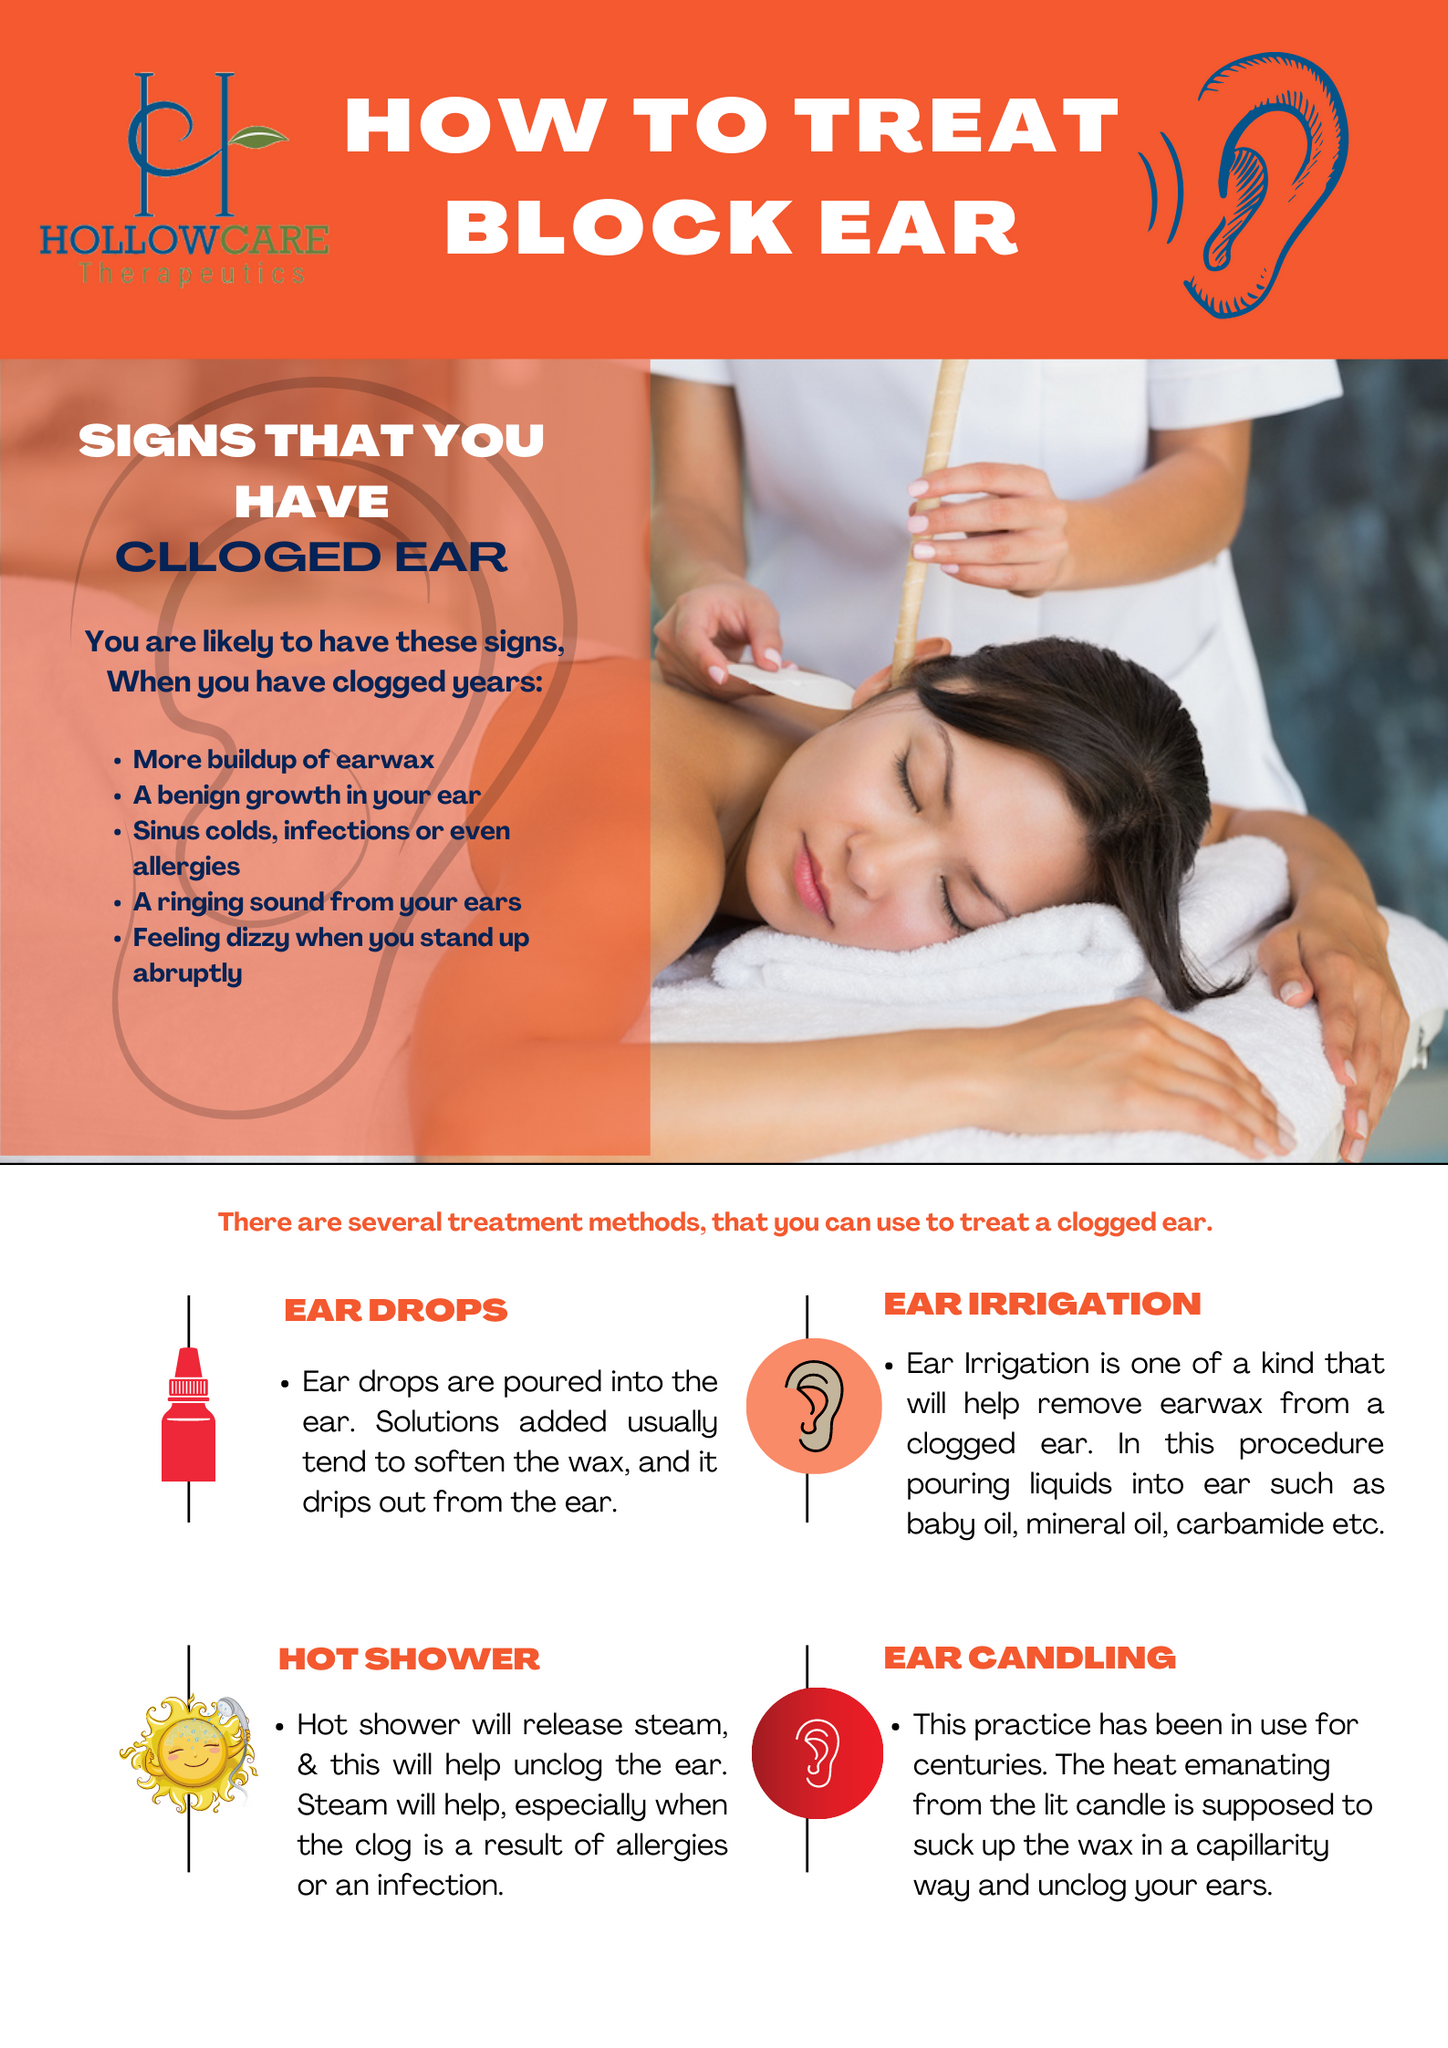 Ear Candling Removes Excess Earwax & Debris.Ear Candling NY